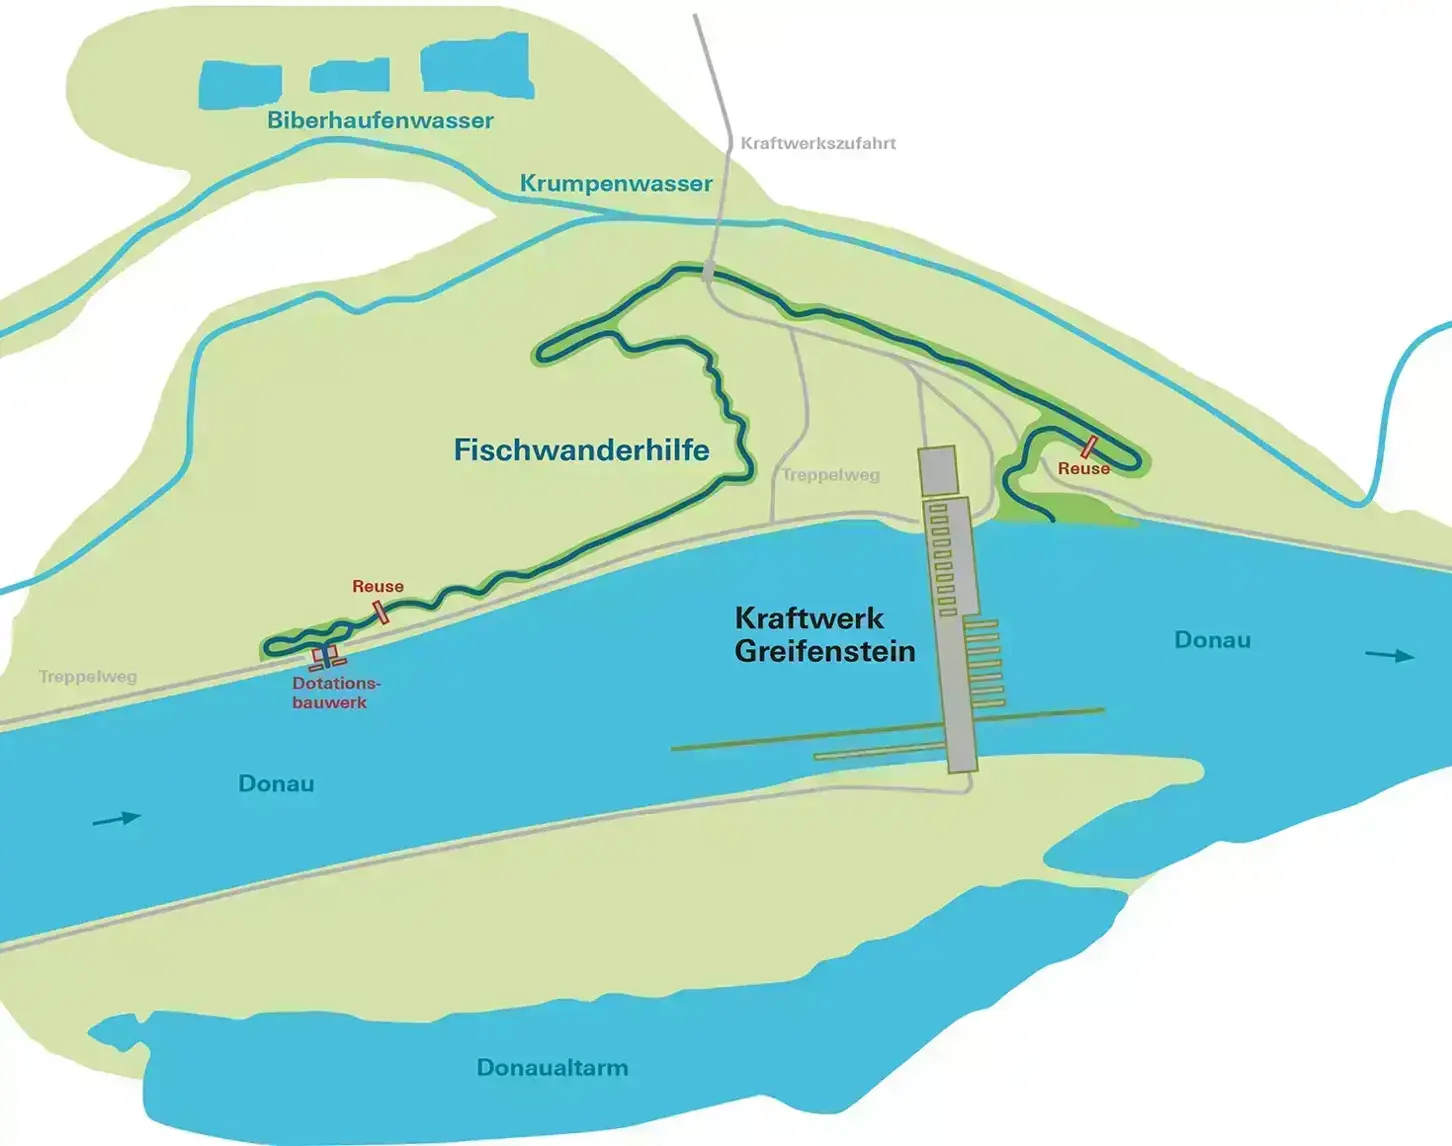 The map shows a rudimentary section around the fish migration aid at the Greifenstein power station.